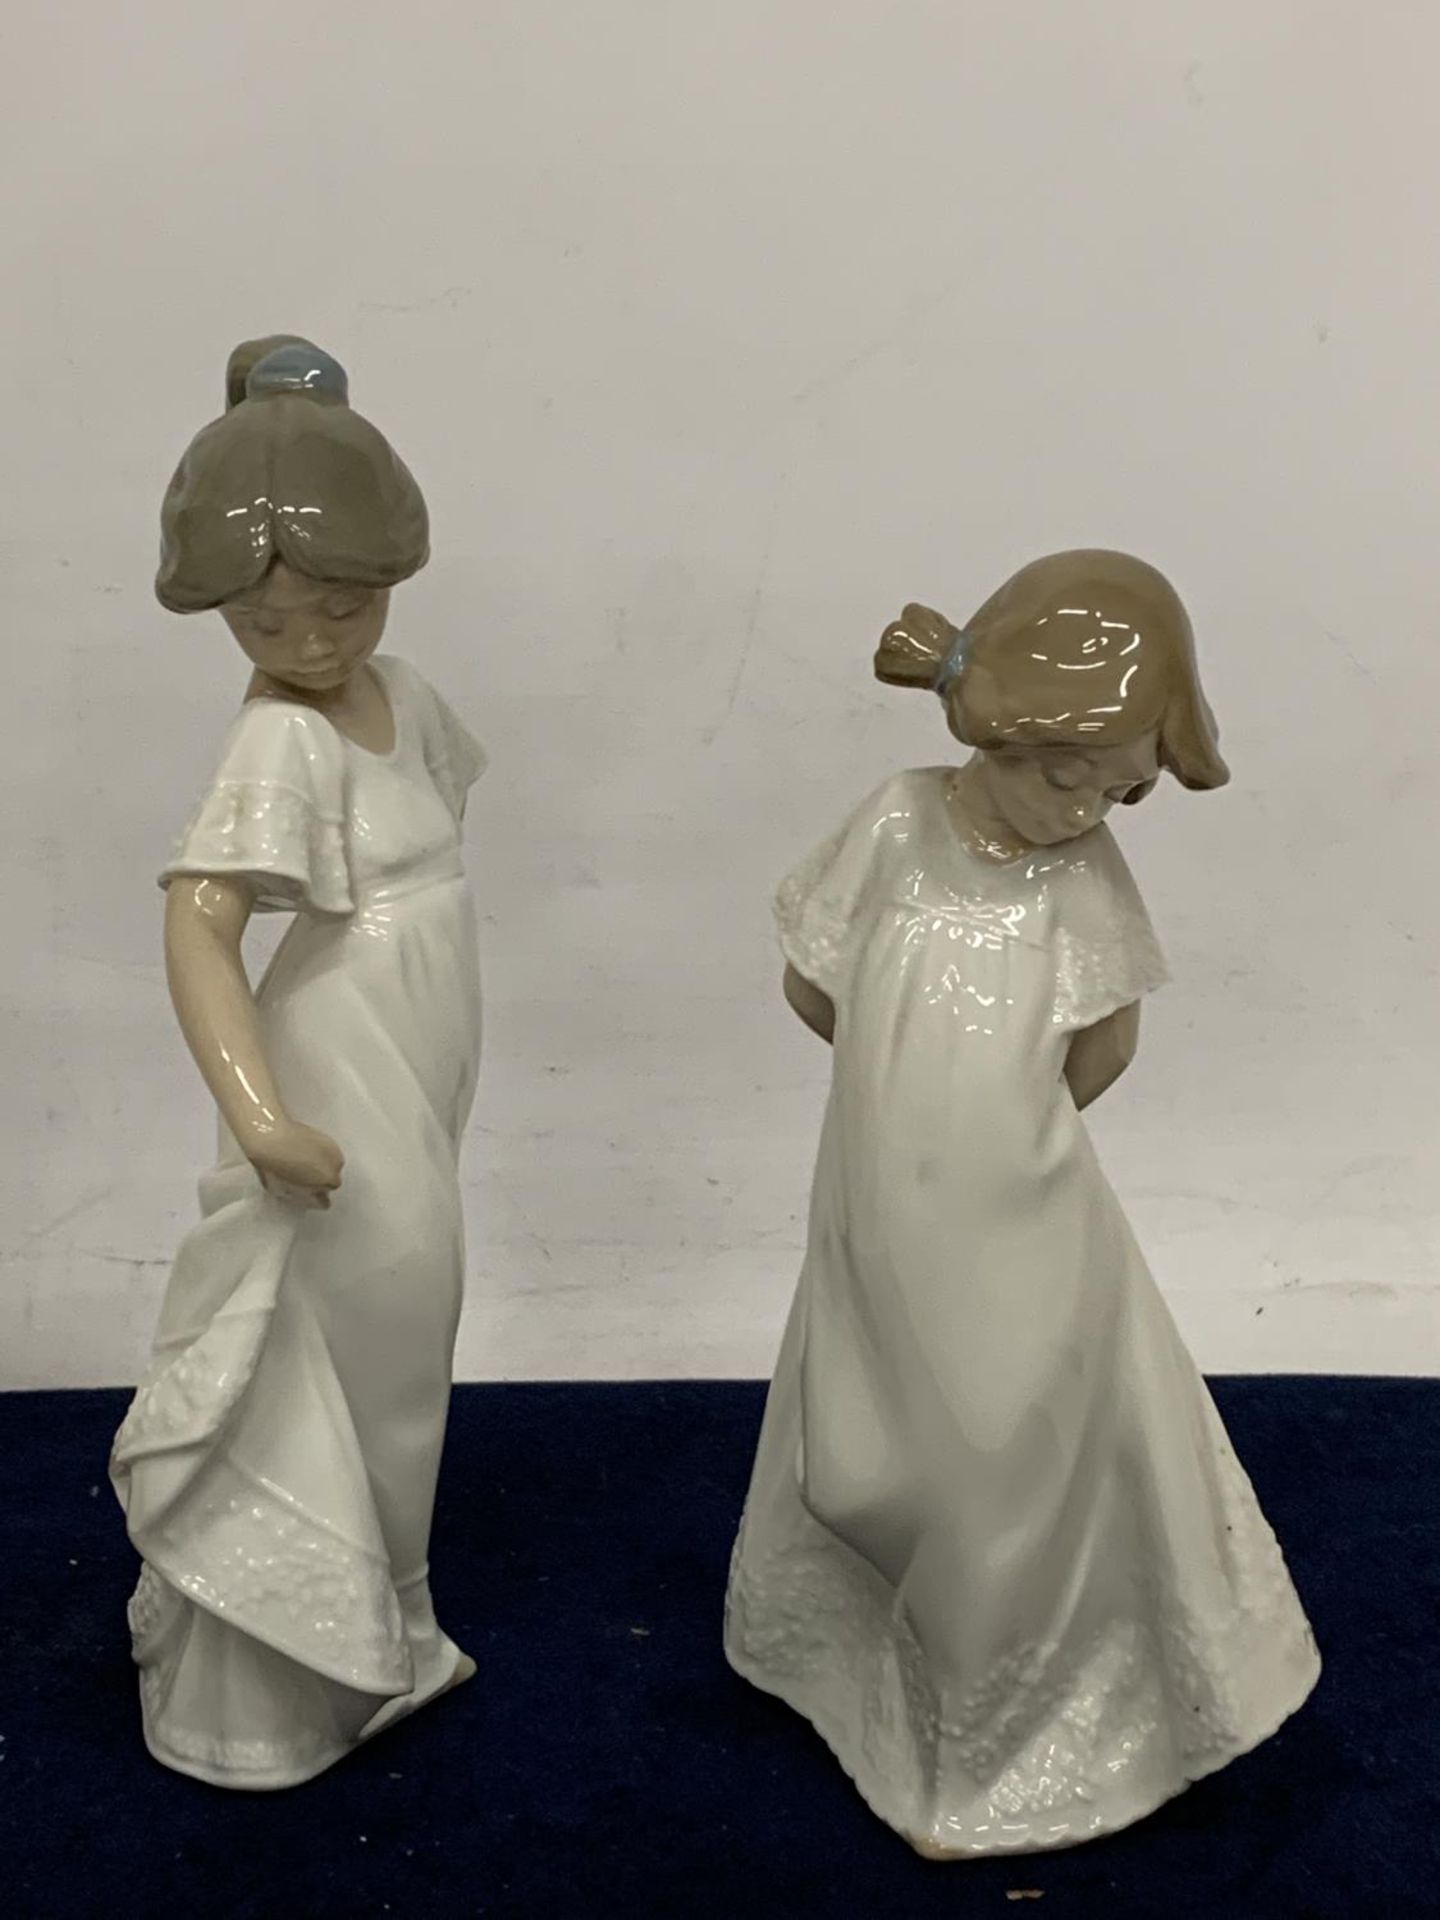 FOUR NAO FIGURINES TO INCLUDE TWO ANGELS AND TWO GIRLS - Image 3 of 4